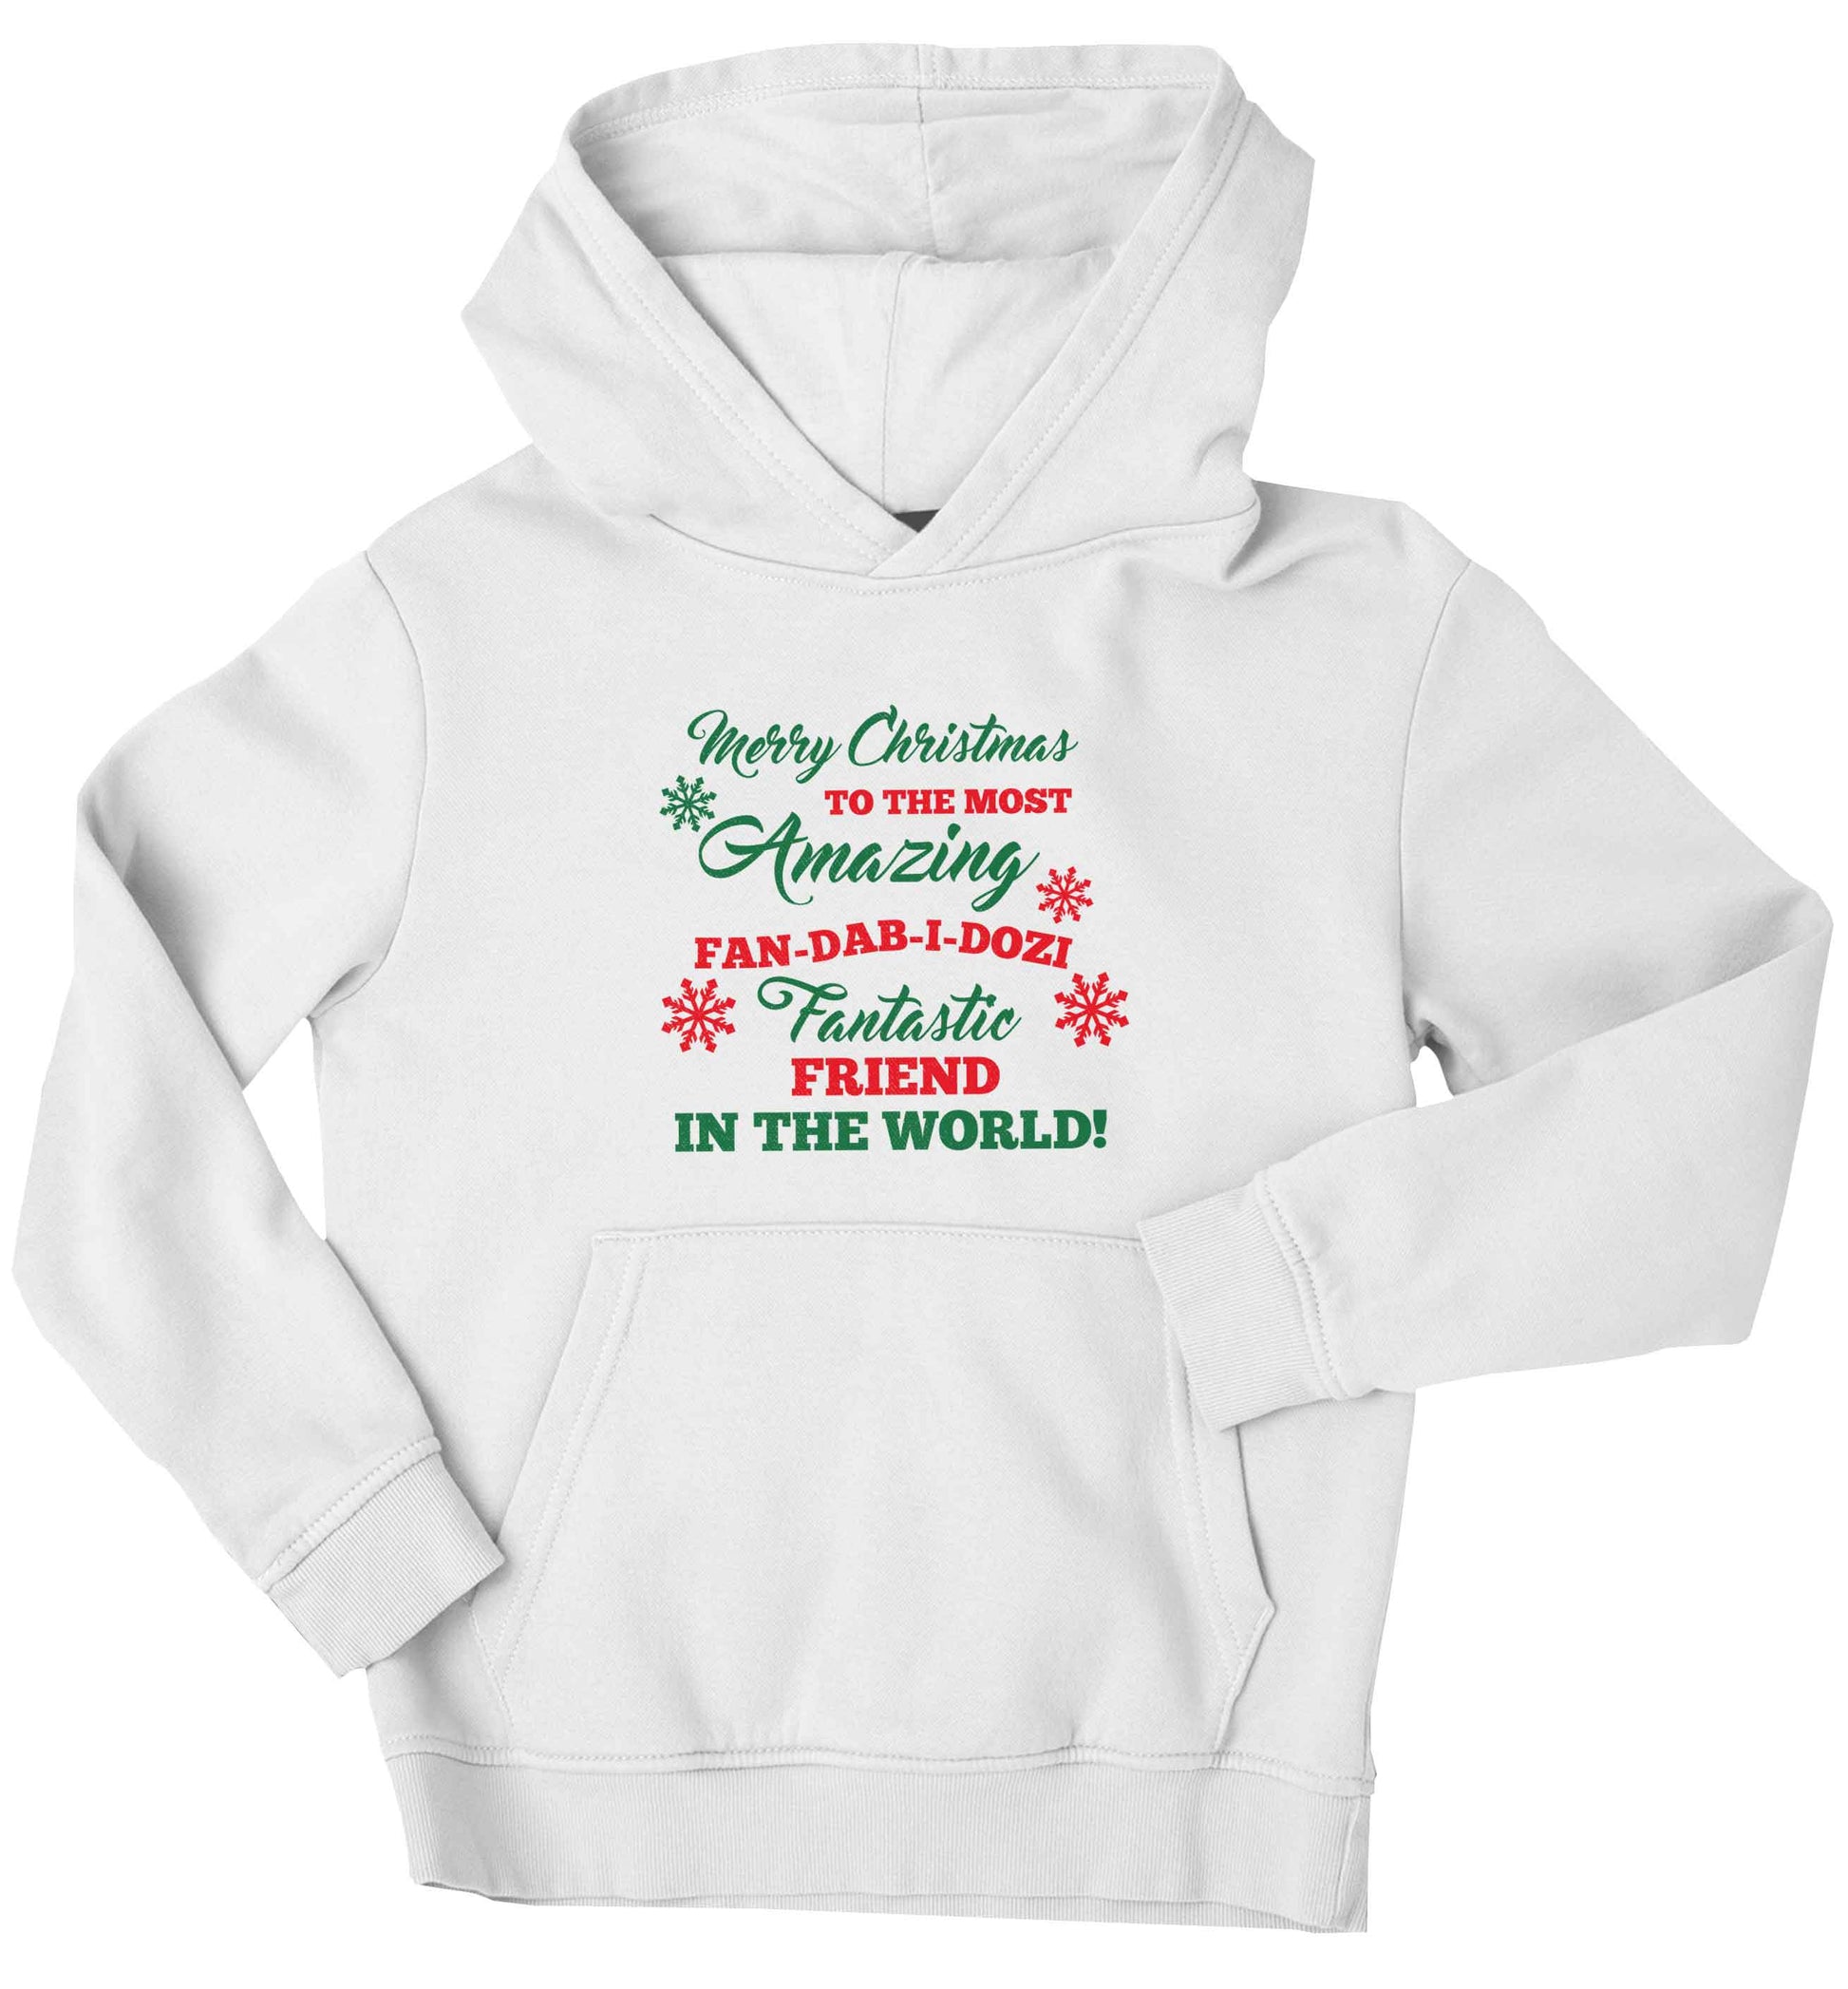 Merry Christmas to the most amazing fan-dab-i-dozi fantasic friend in the world children's white hoodie 12-13 Years